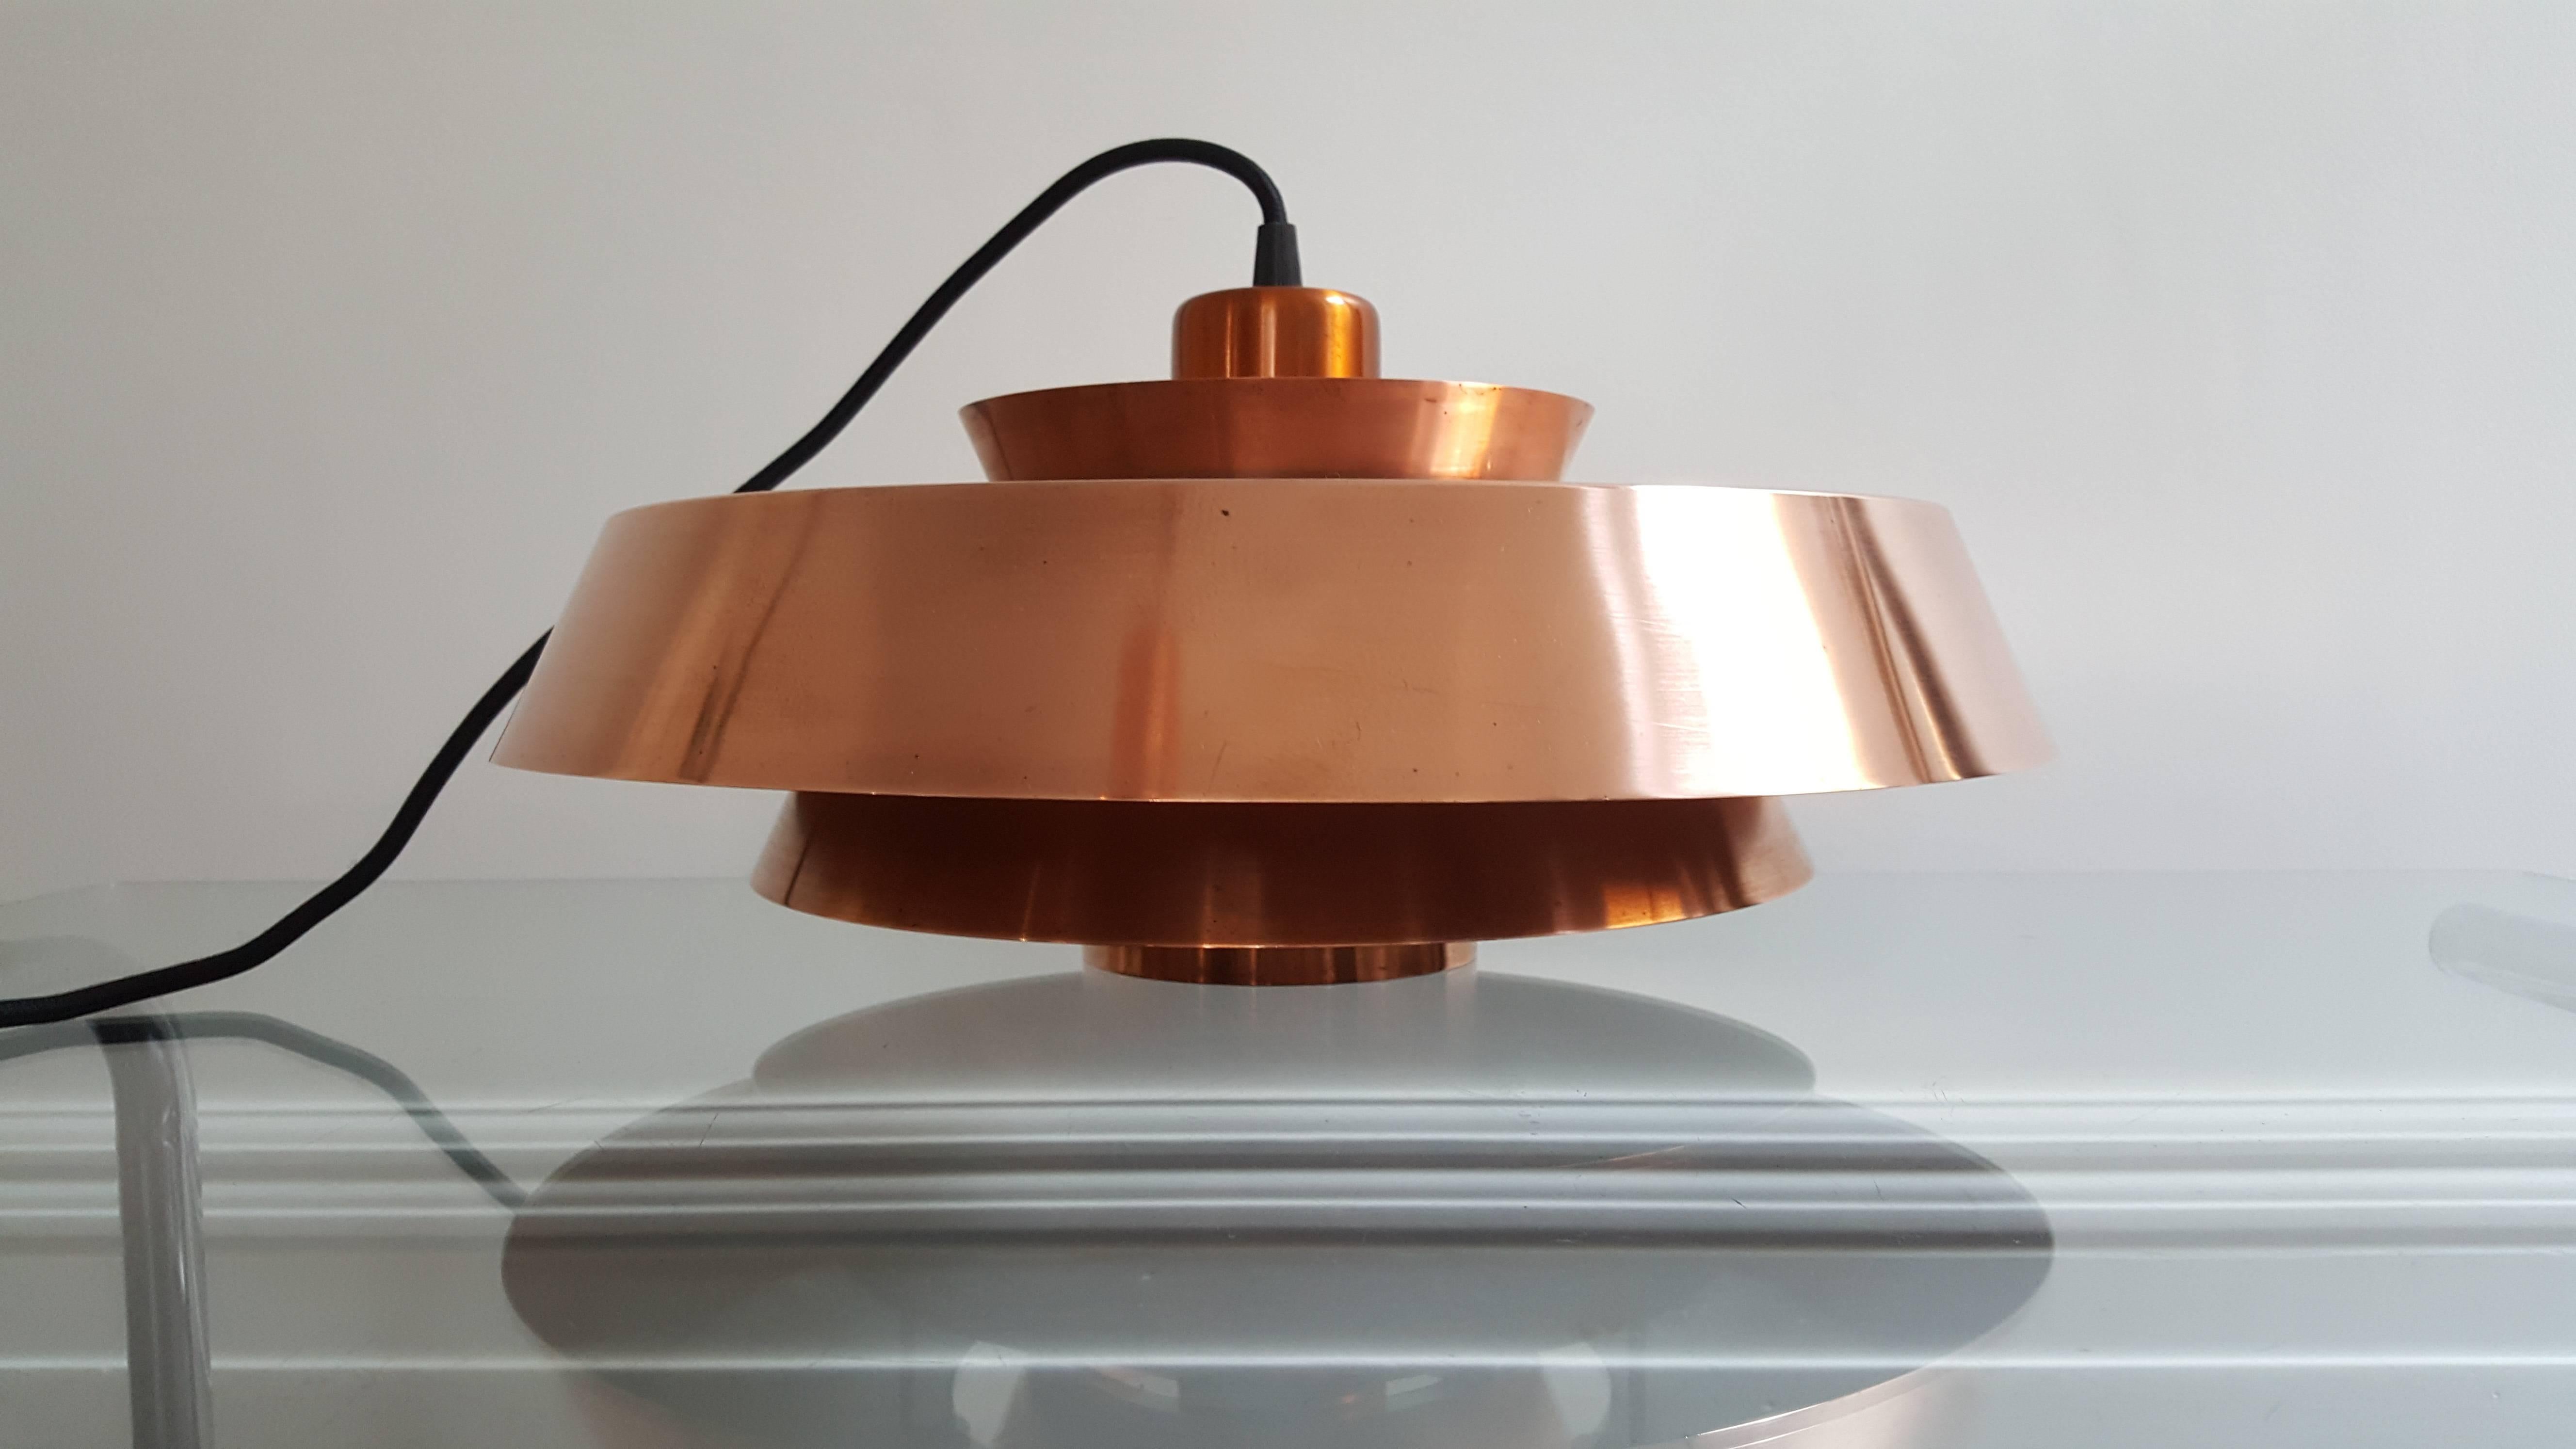 Jo Hammerborg Nova pendant light in copper for Fog & Mørup, Denmark, 1960s

This vintage, modernist light fixture is crafted in copper in three round, graduated tiers

In 1957 Jo Hammerborg became head of design at Fog & Mørup. His incumbency in